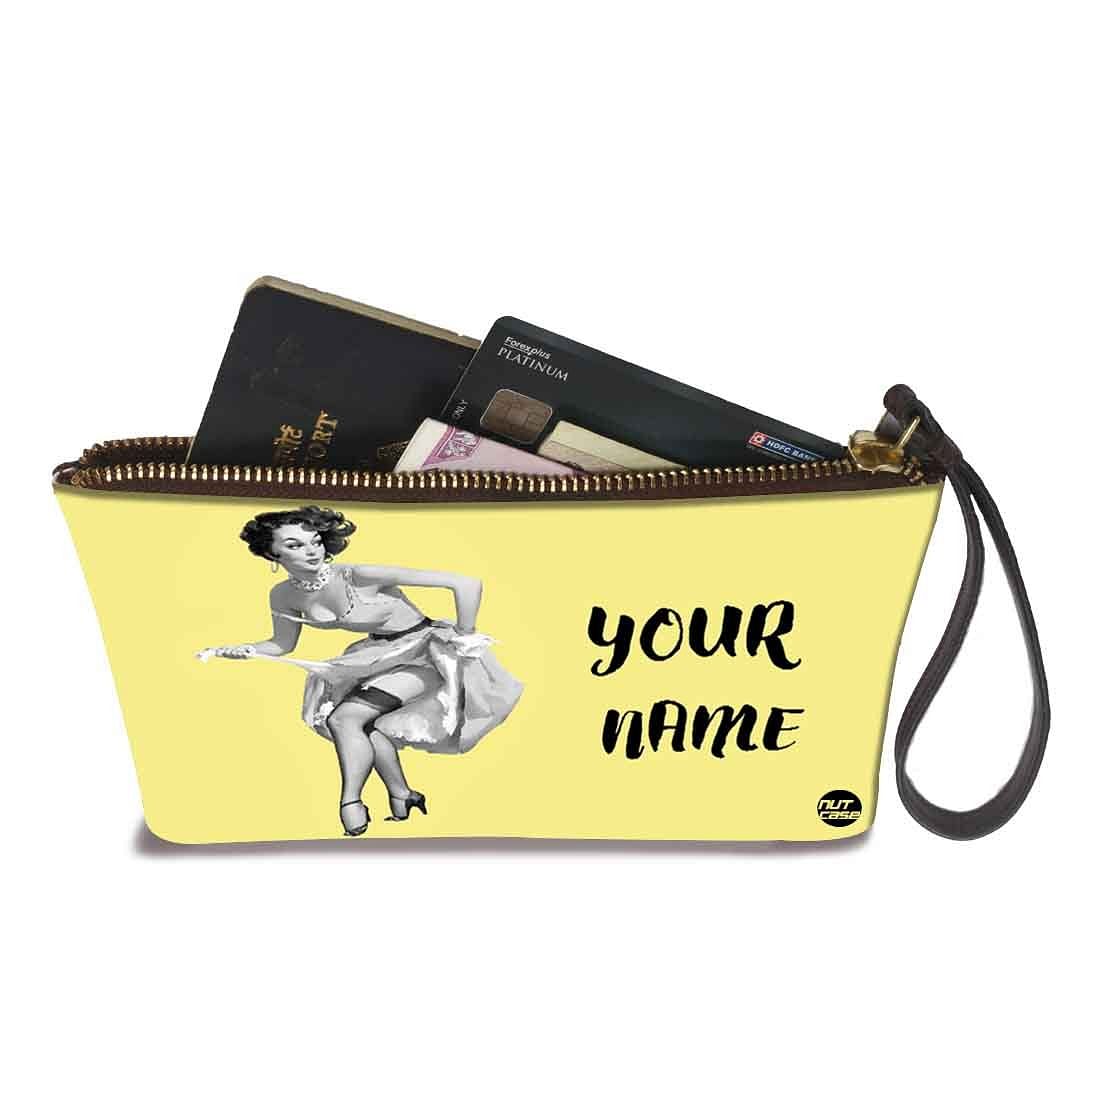 Small Bracelet Pouch - Cool Girl Yellow Nutcase